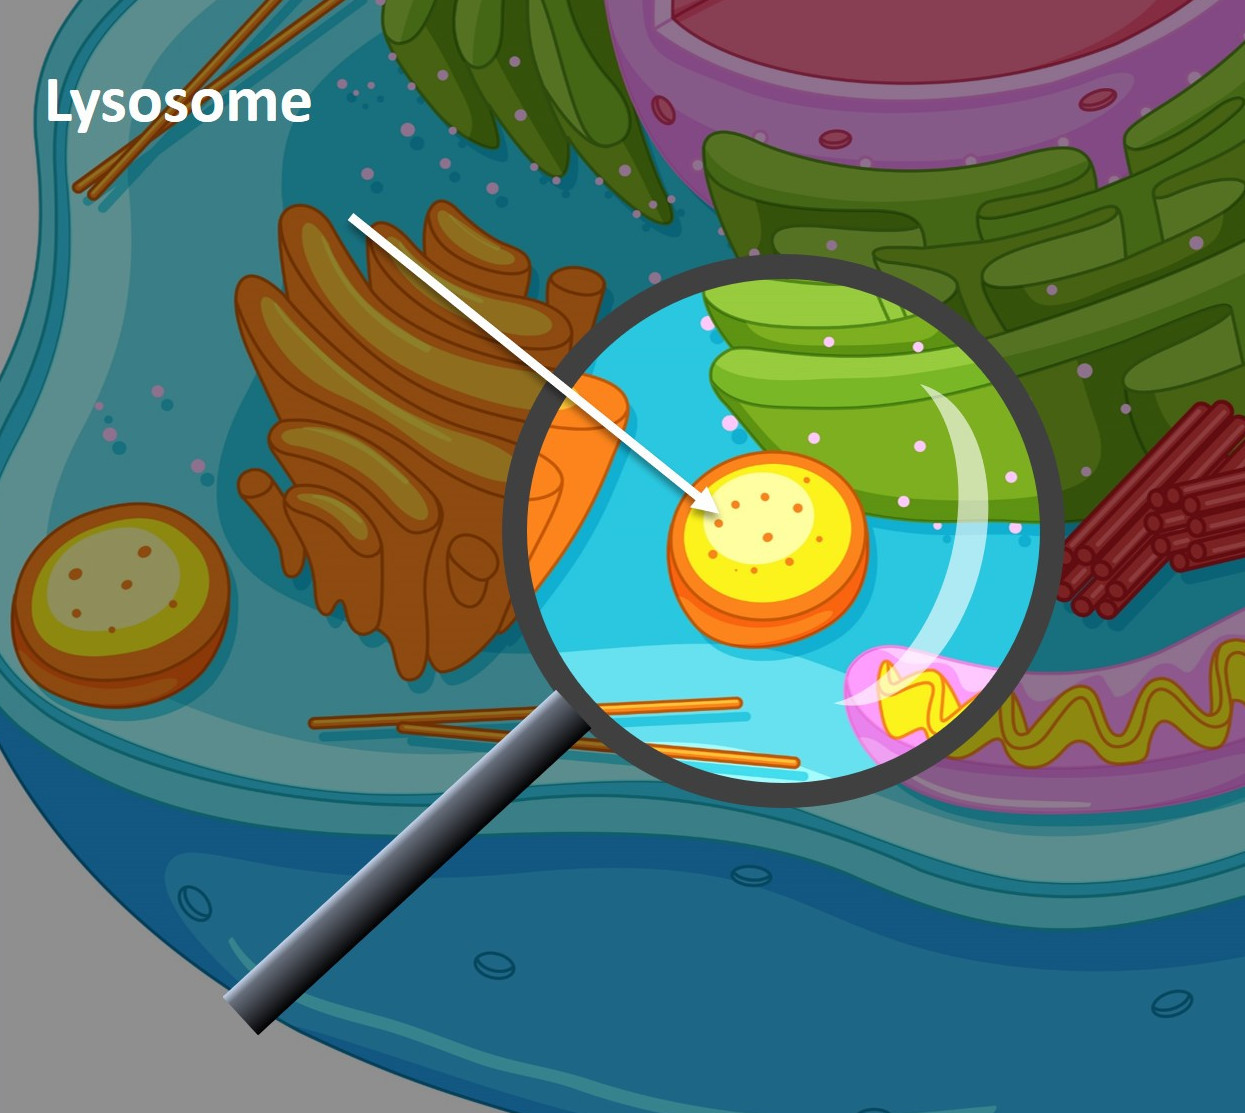 close up of a cell showing lysosome